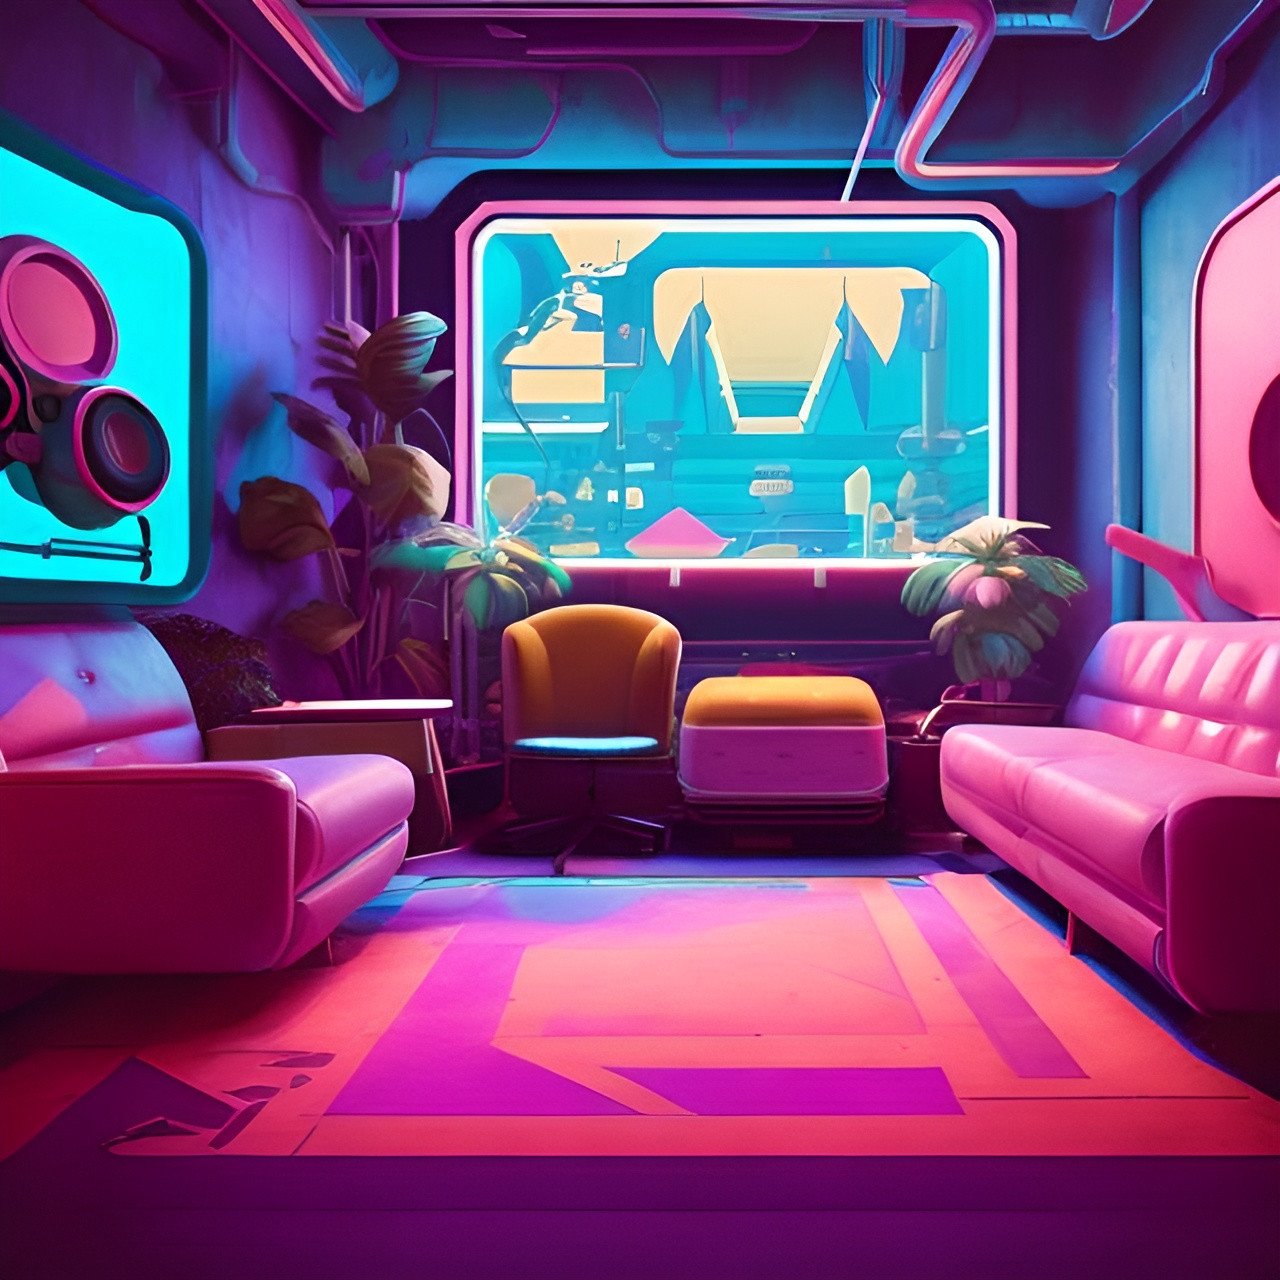 retrofuture abstract lounging and gaming space | OpenArt